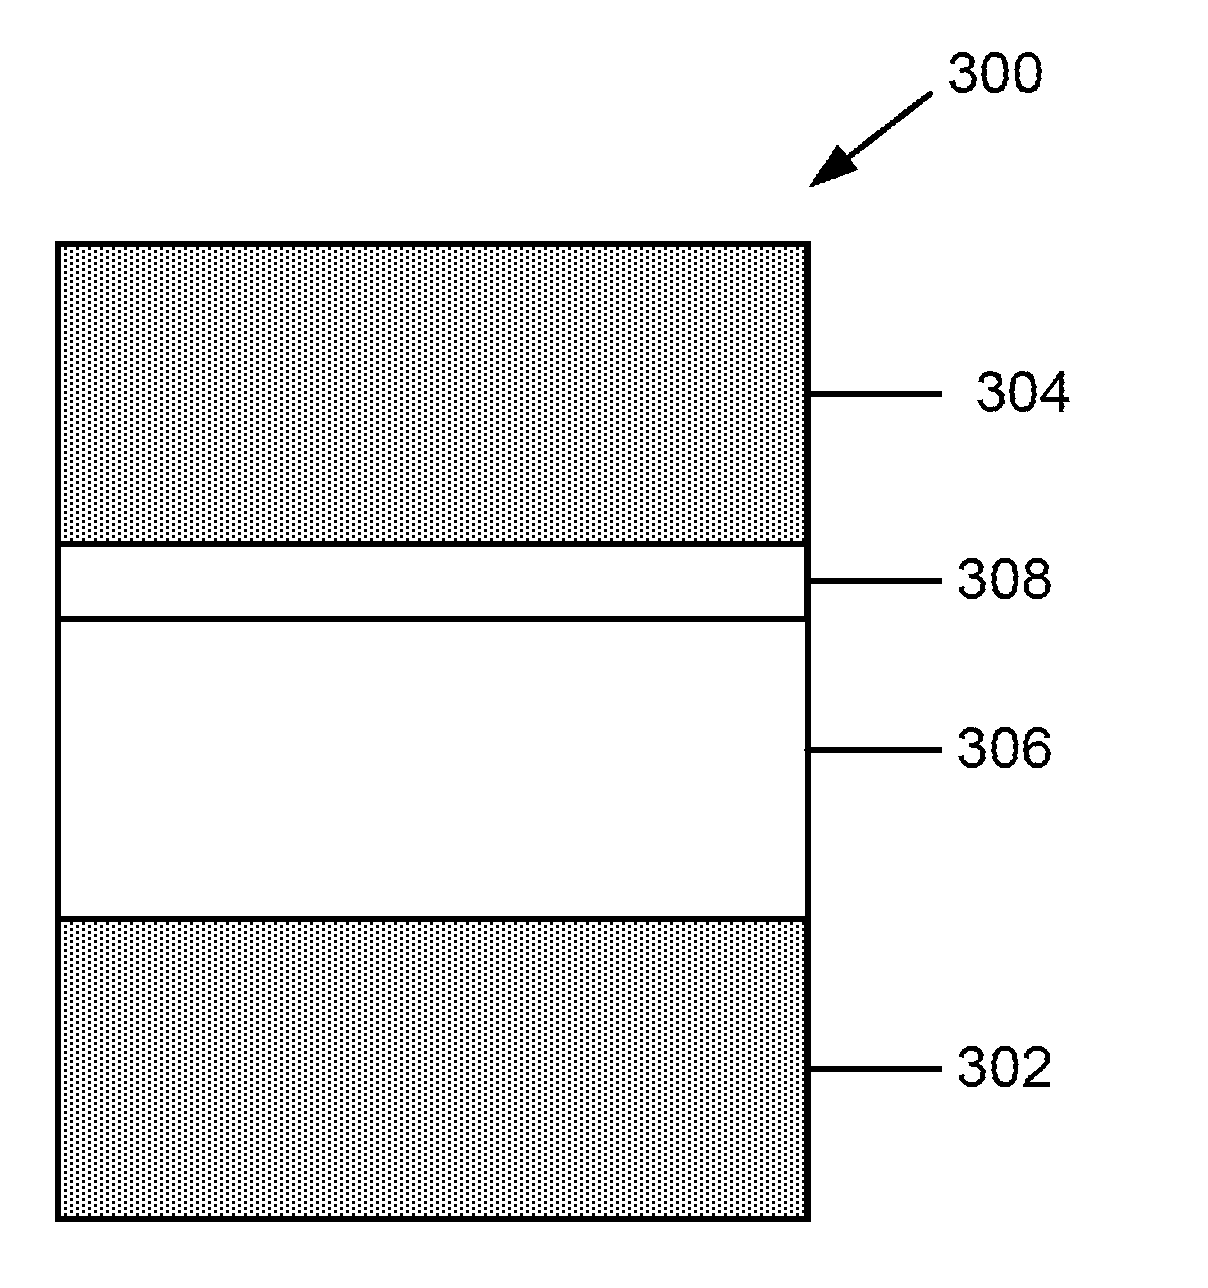 Conductive path in switching material in a resistive random access memory device and control